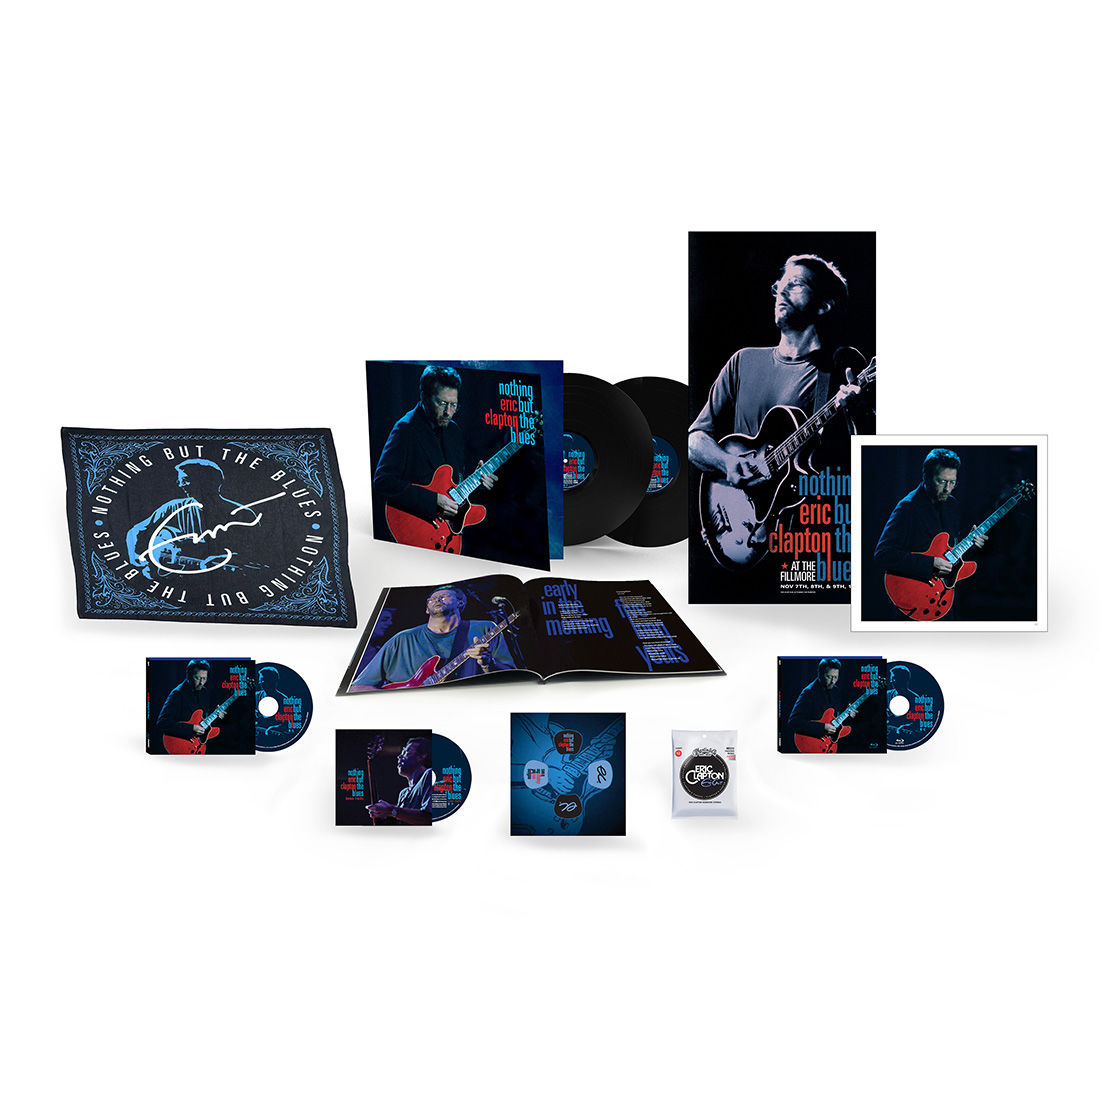 Nothing But the Blues: Super Deluxe Vinyl + CD Set